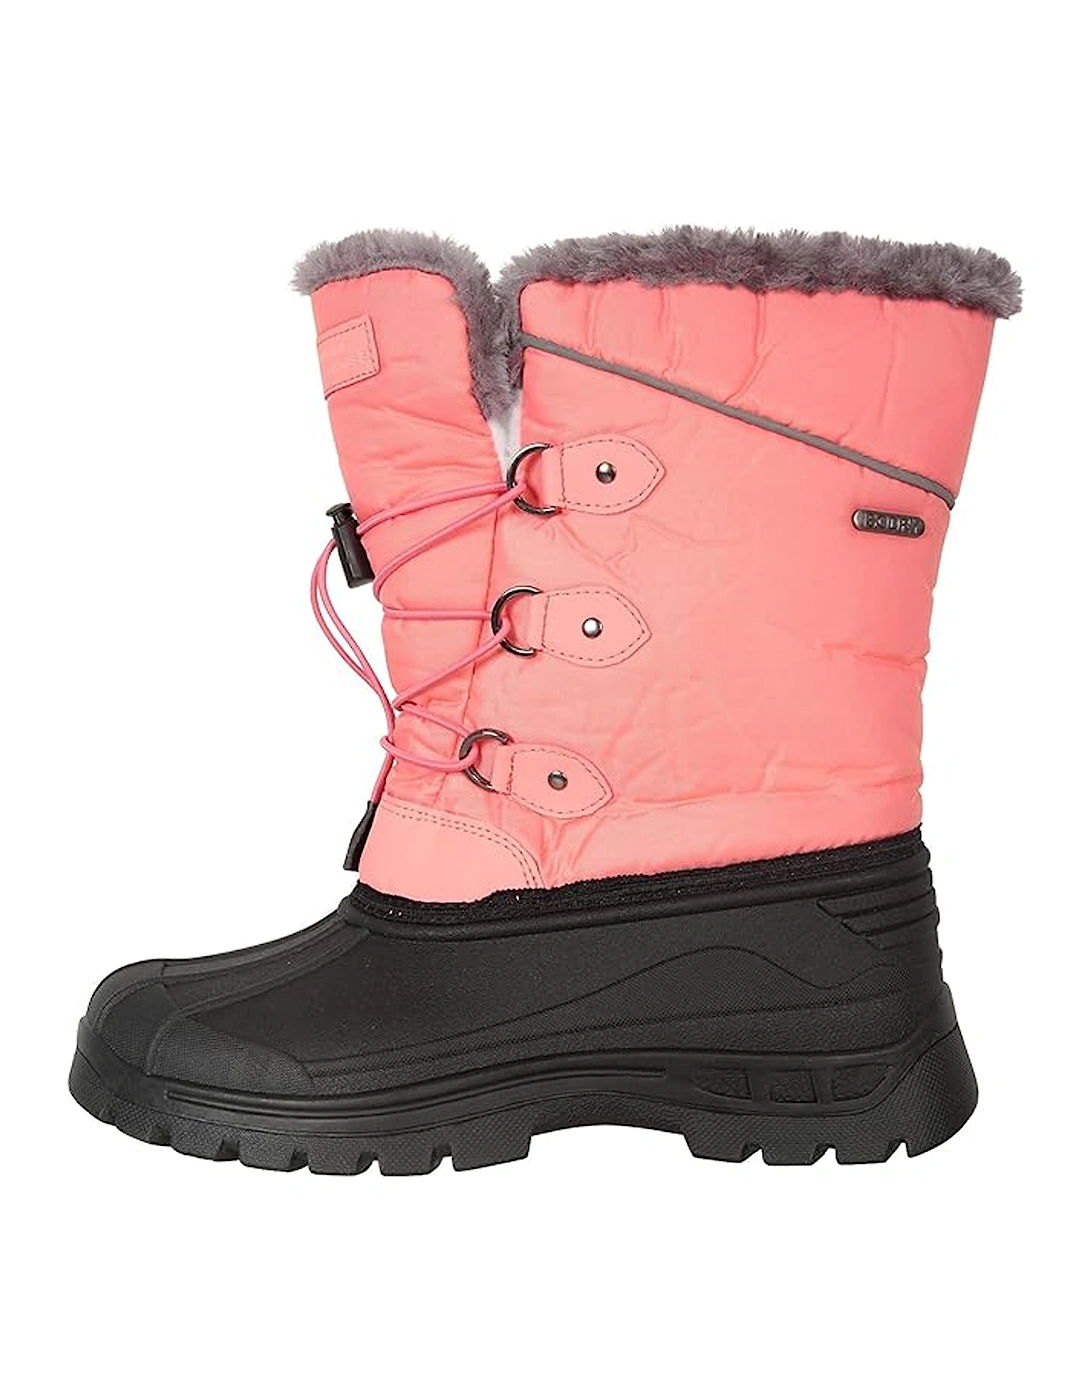 Childrens/Kids Whistler Adaptive Snow Boots